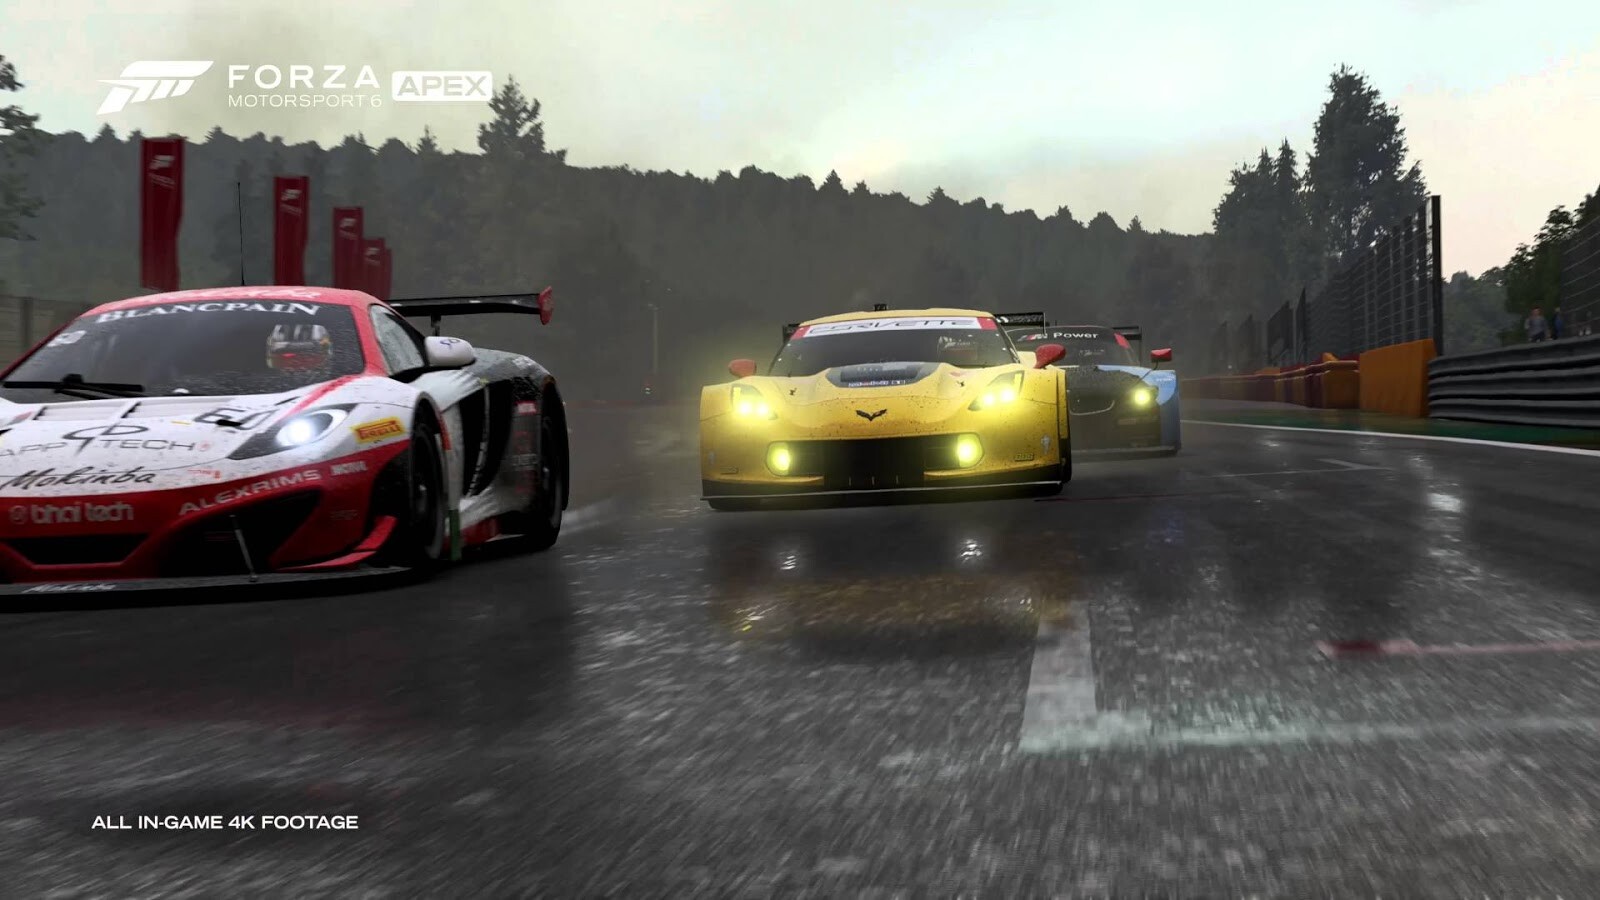 Forza Motorsport 6 Preview